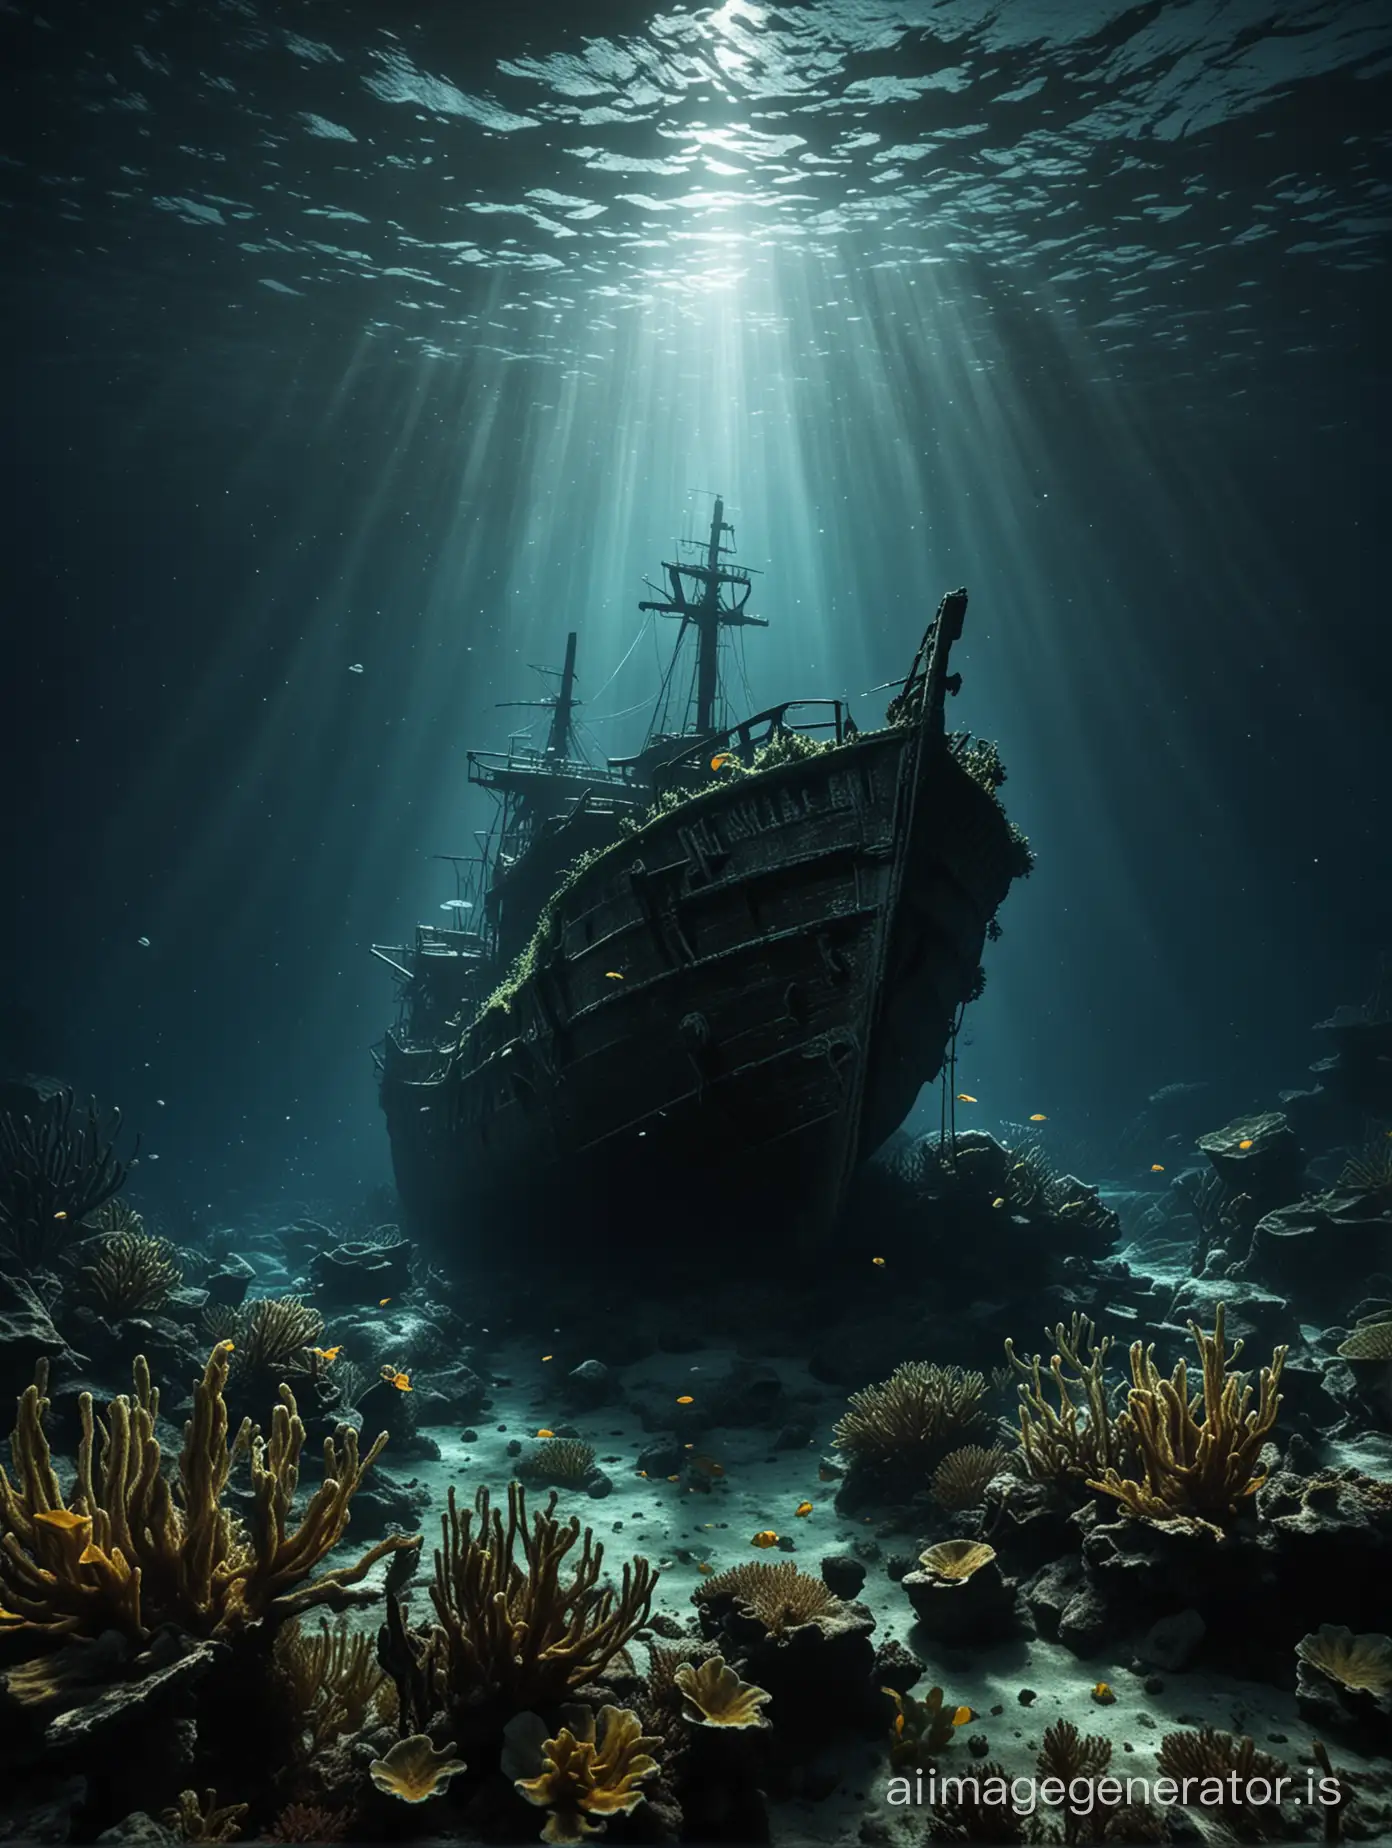 Exploring-the-Luminescent-Depths-Shipwreck-Dive-Among-Underwater-Flora